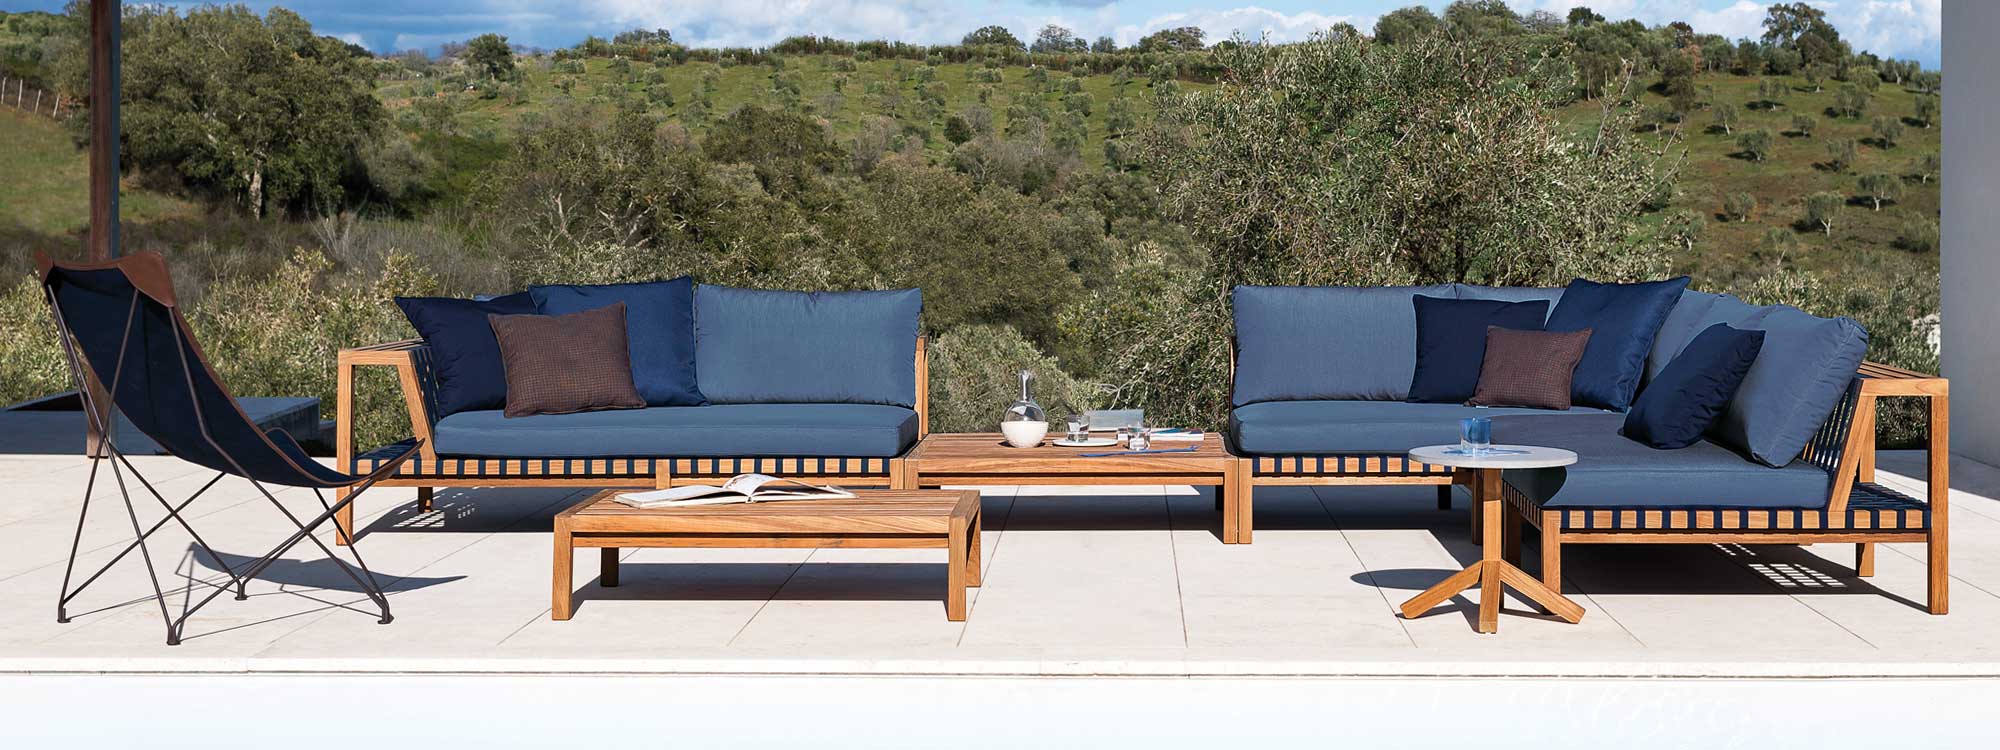 Image of RODA Network teak corner sofa with Blue webbing and Blue cushions with olive orchard in background